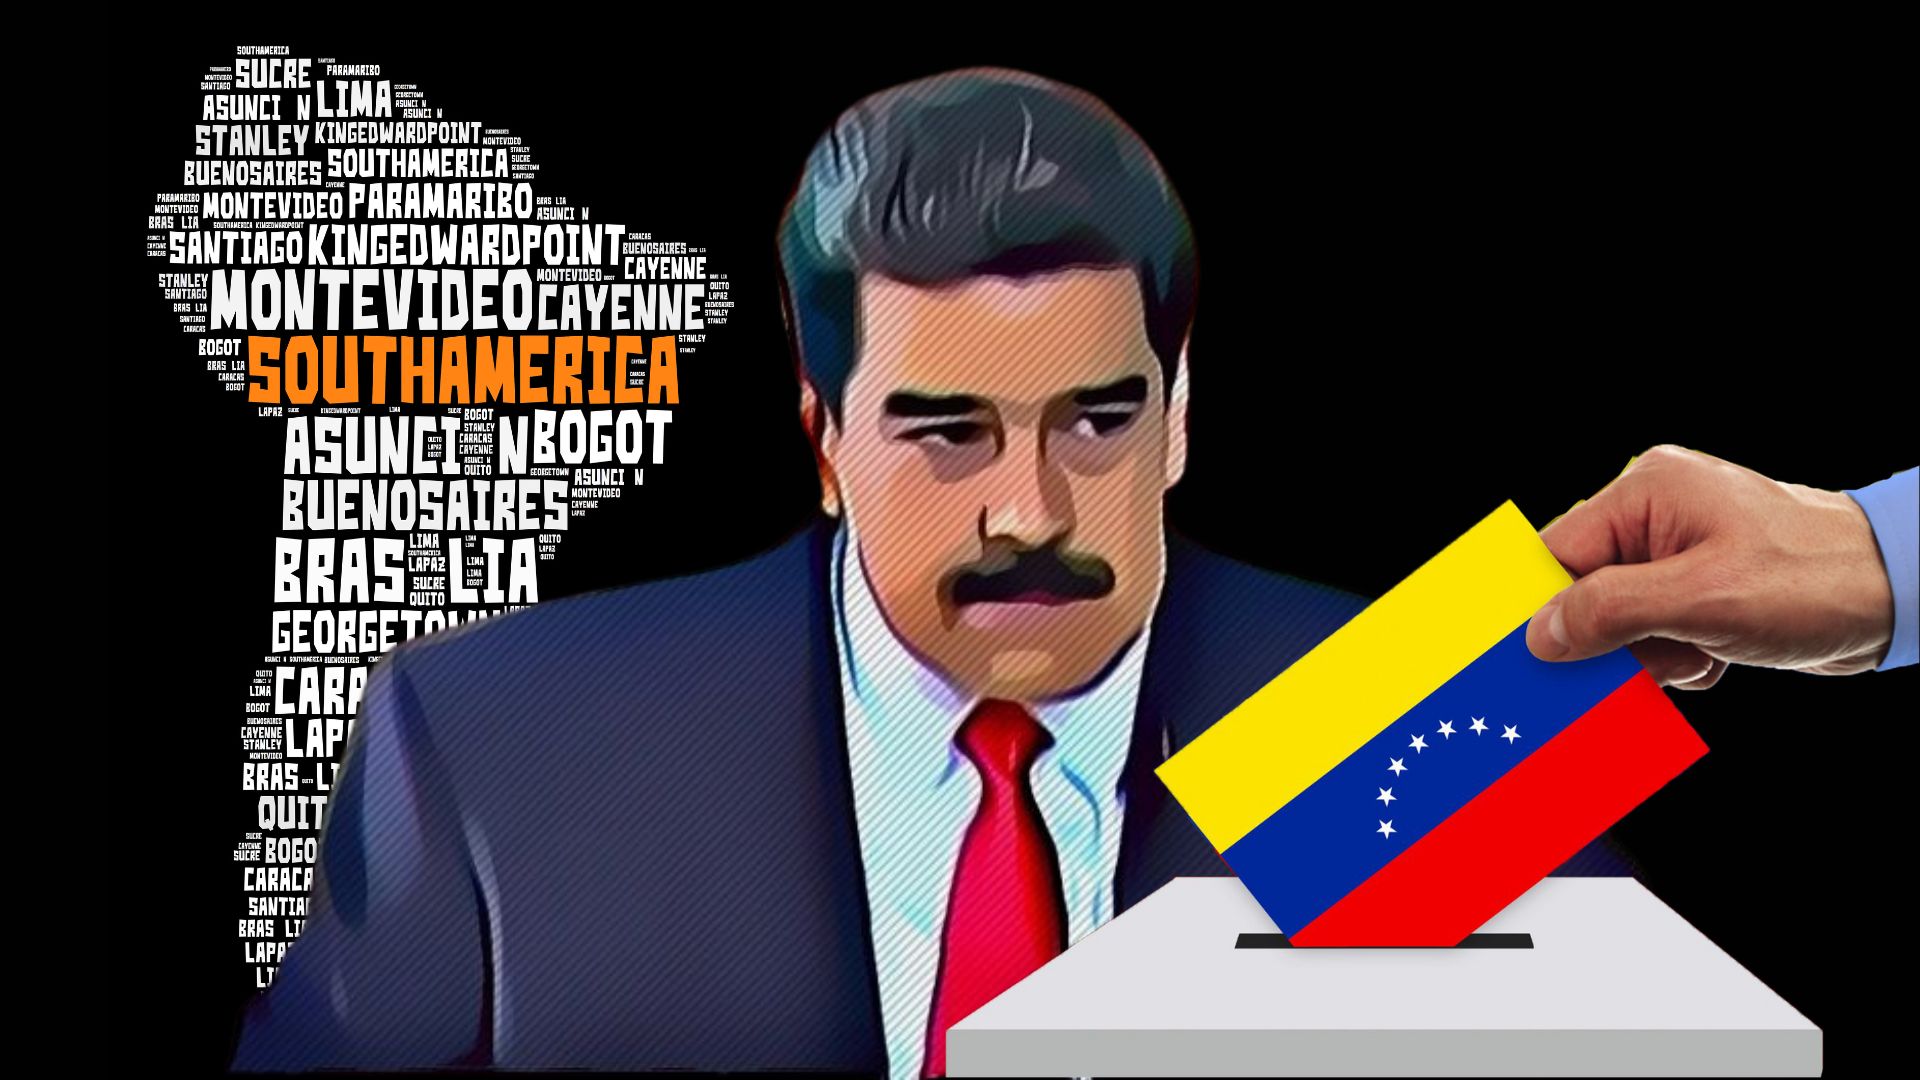 Venezuela is silent about the rigged elections